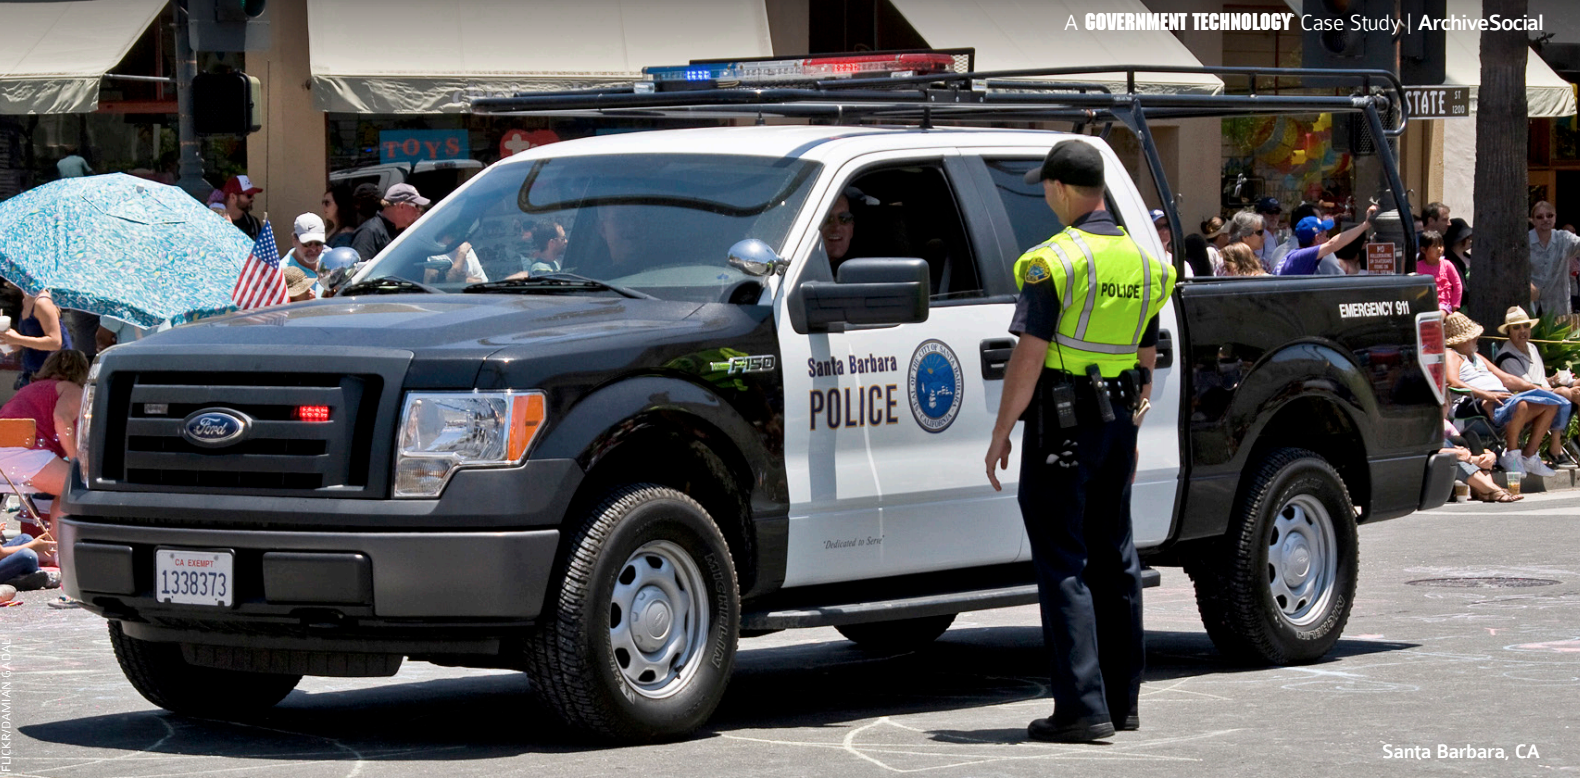 Santa Barbara Police Department responds to a social media records request with ArchiveSocial